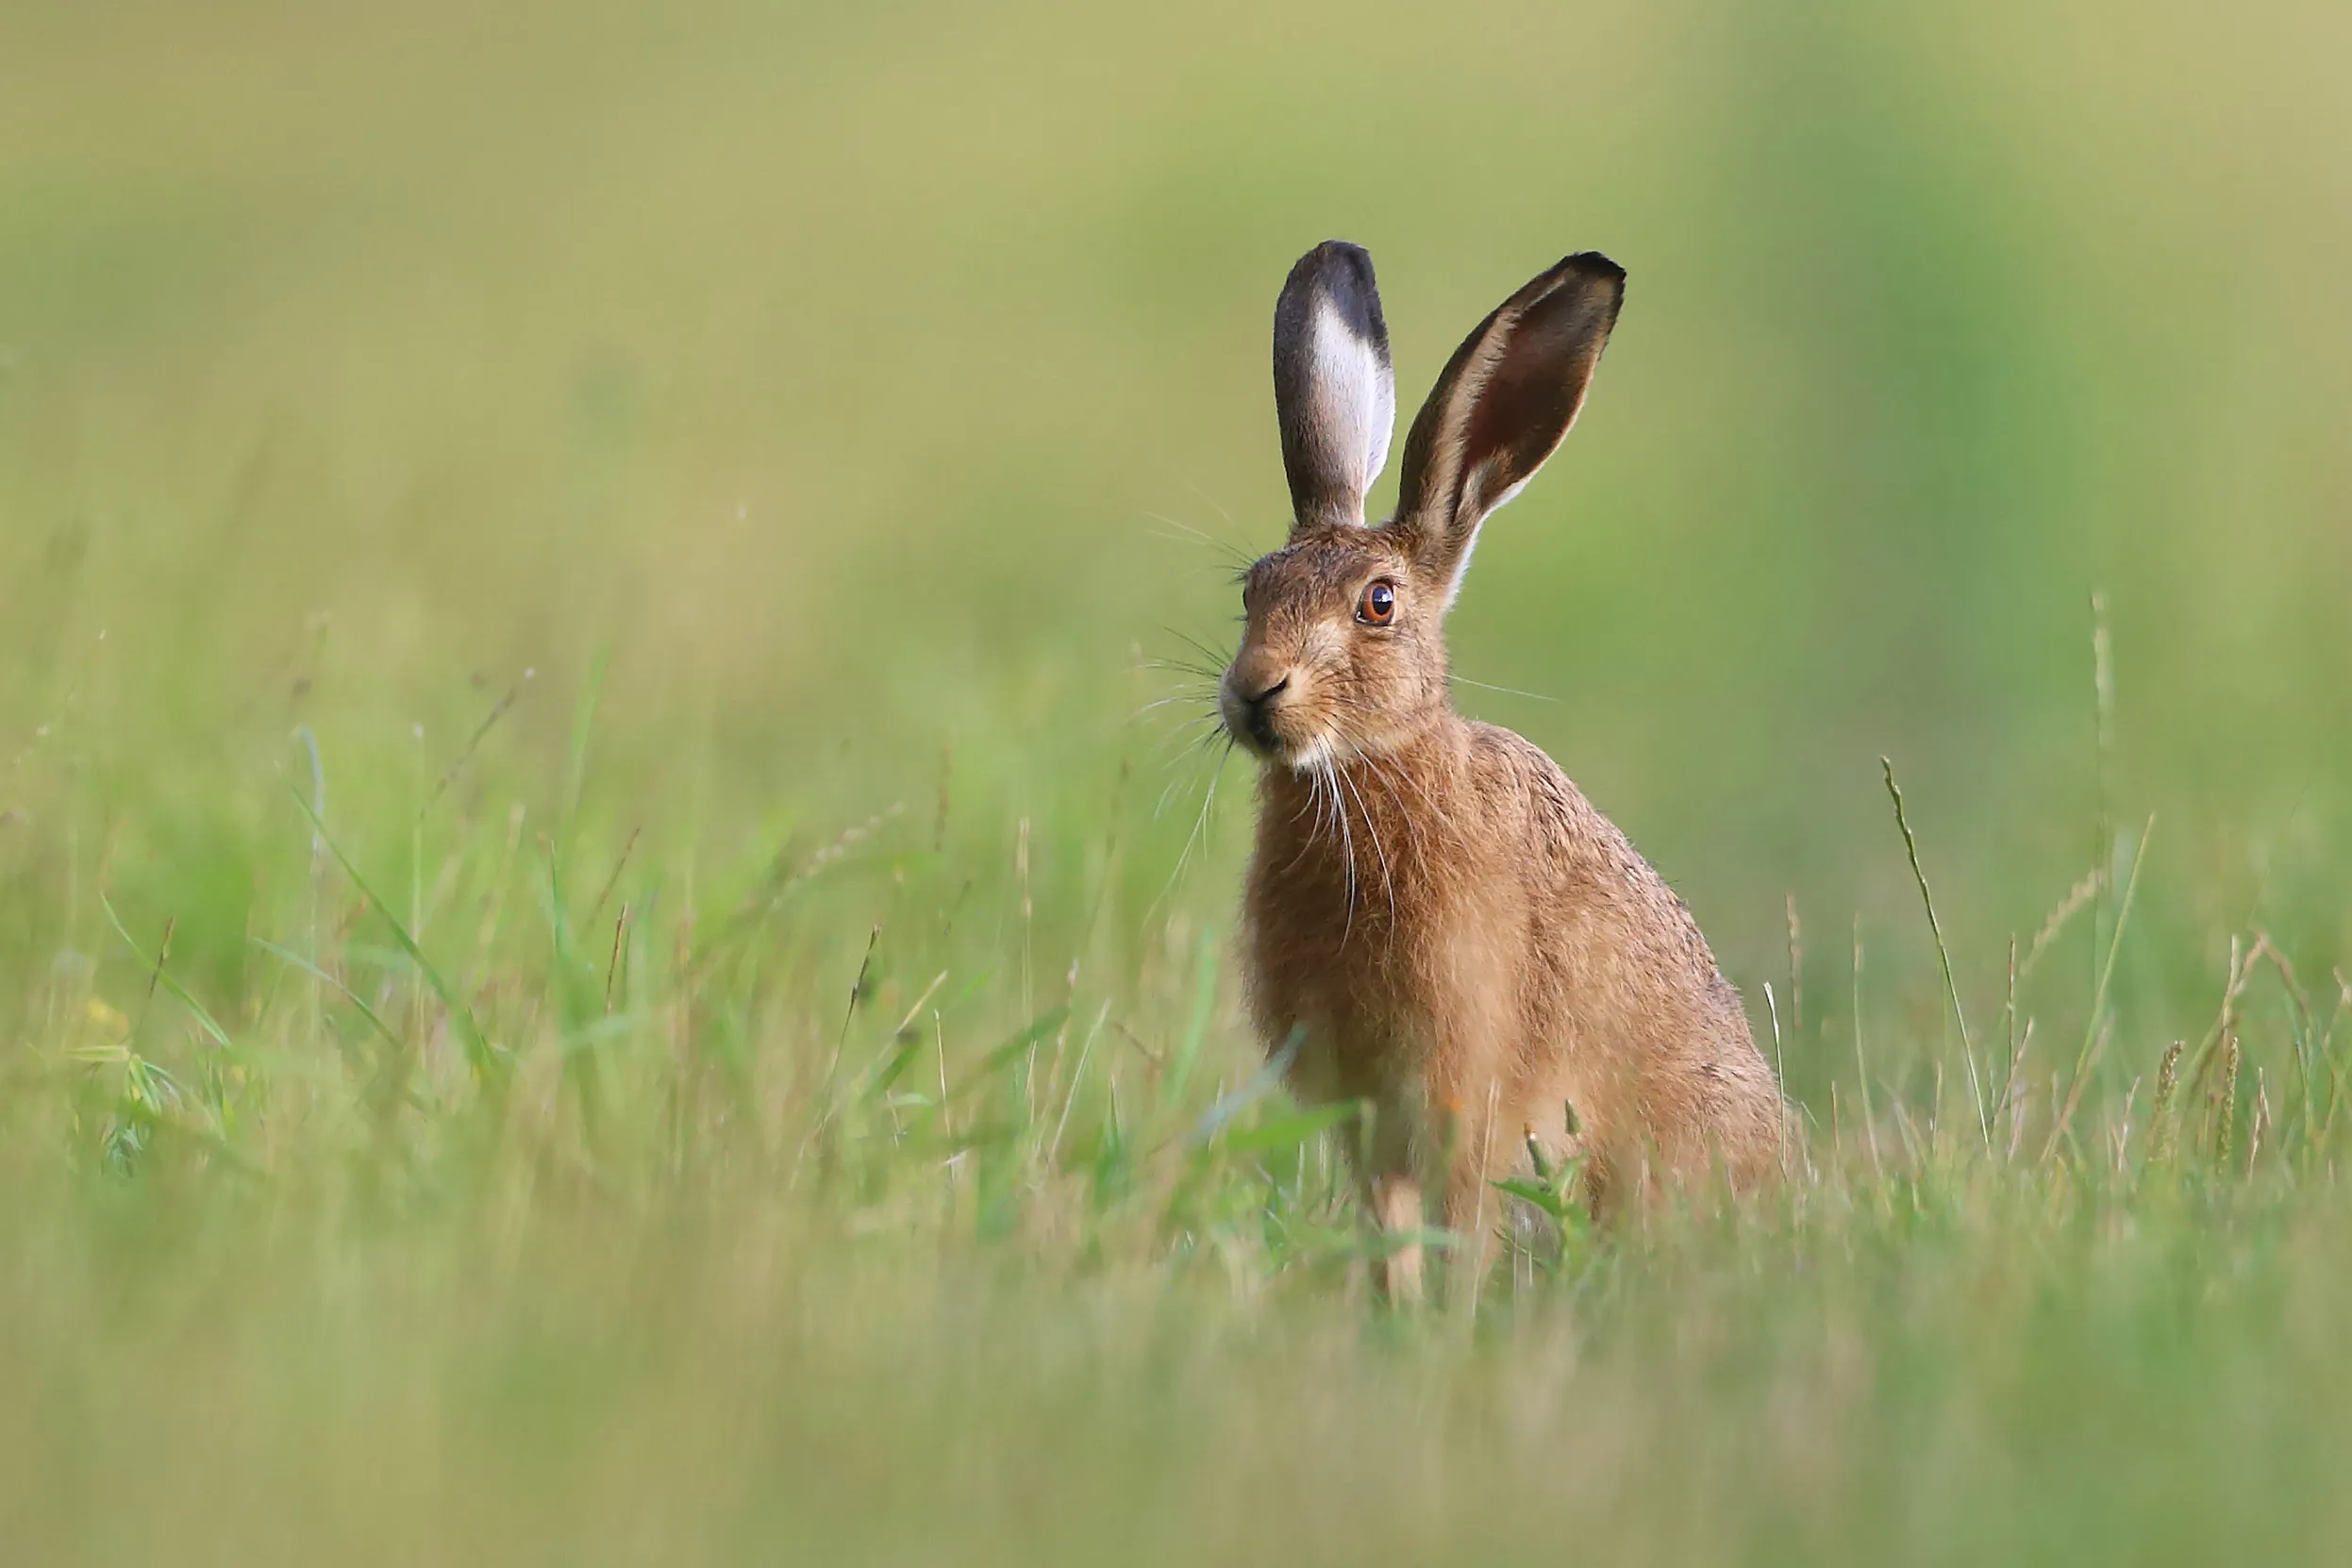 A lone Brown Hare sitting in a field of grass.